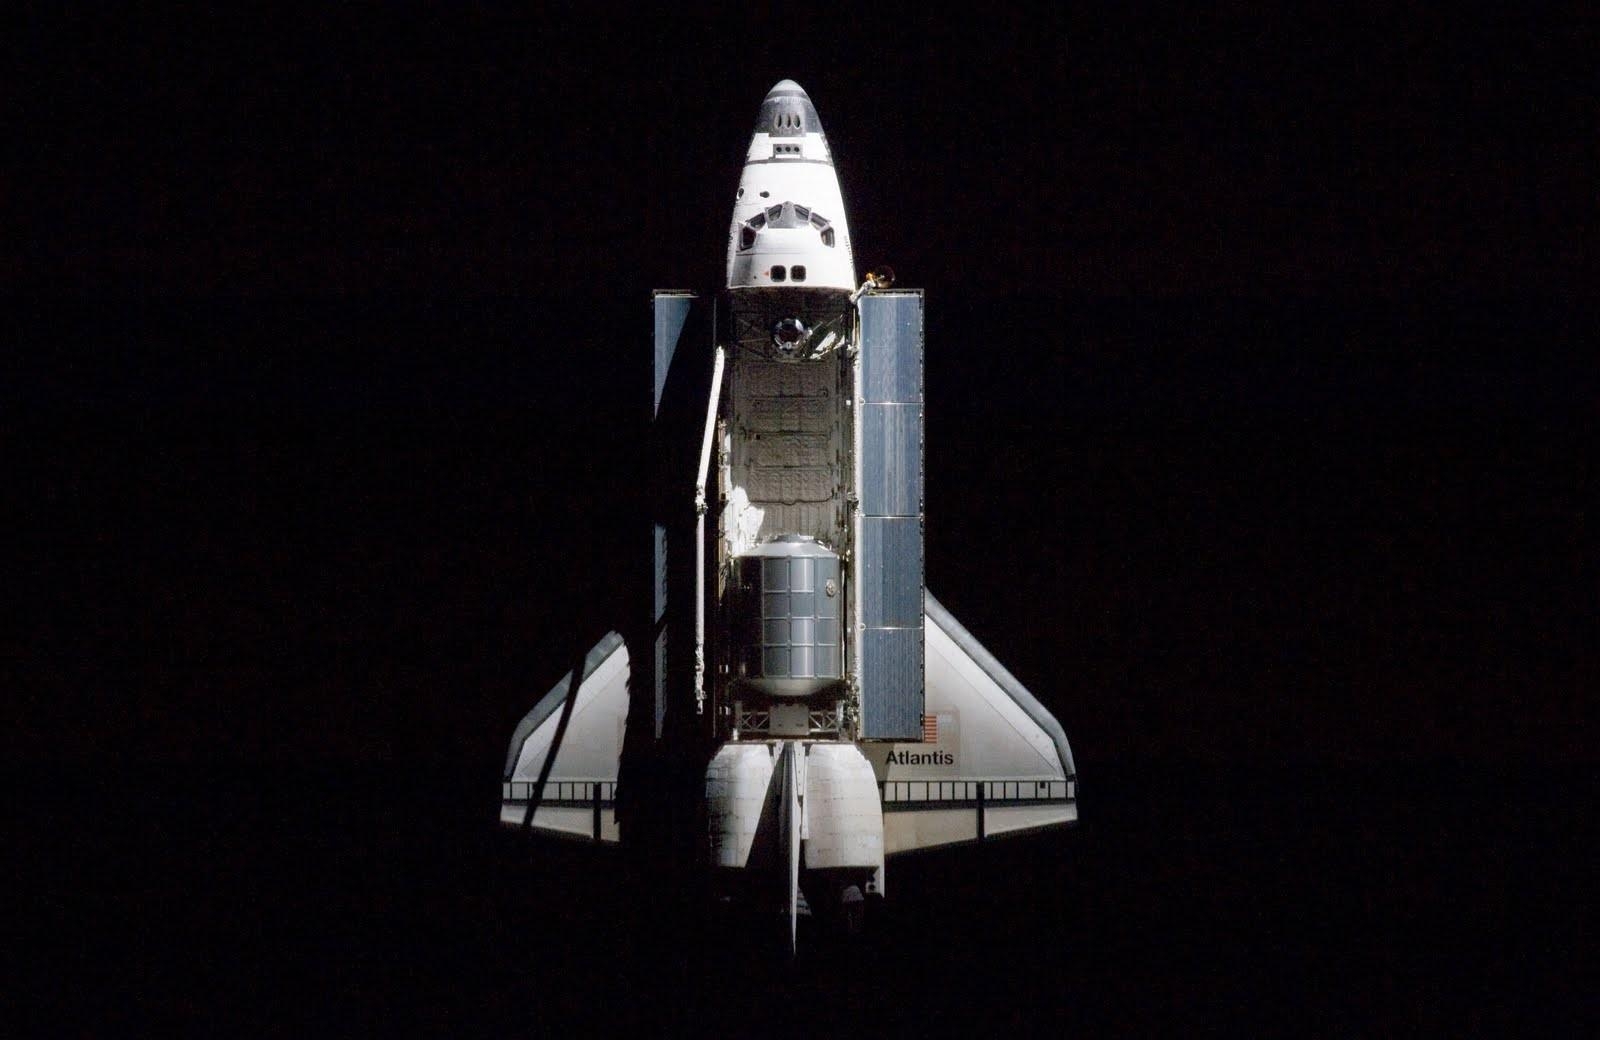 shuttle, flight, space Wallpaper, HD Space 4K Wallpapers, Images